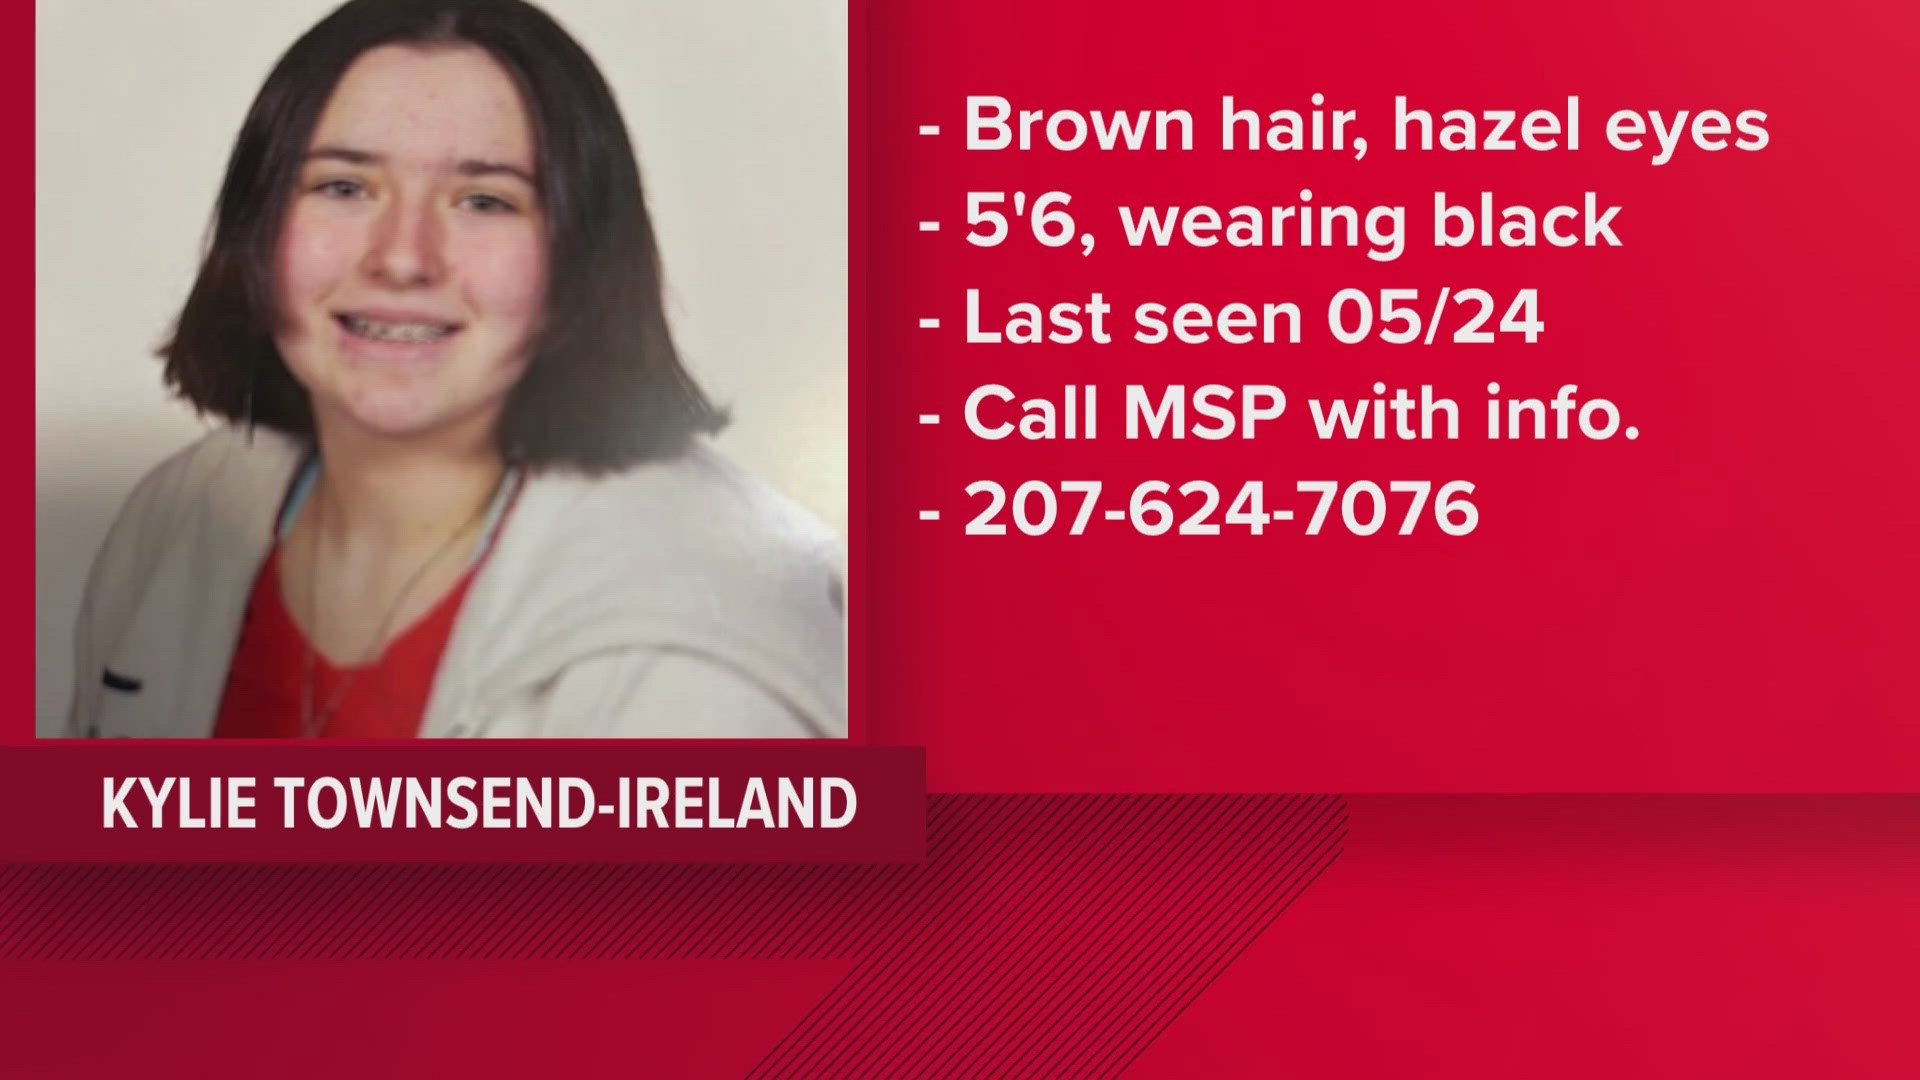 The 14-year-old apparently went missing again about two days after she was found safe, according to Maine State Police.